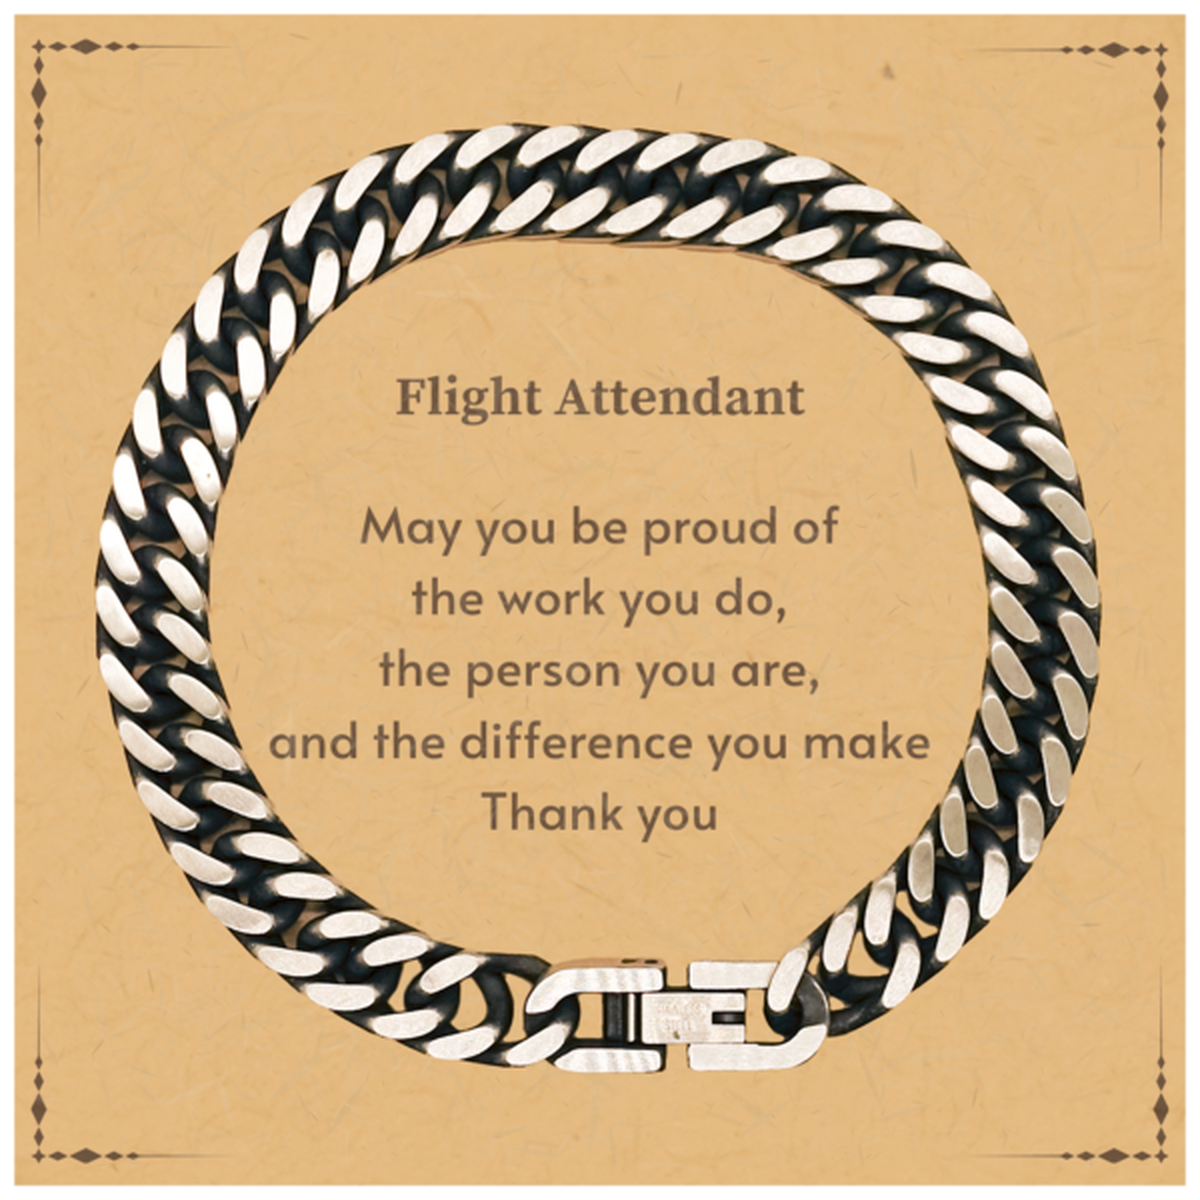 Heartwarming Cuban Link Chain Bracelet Retirement Coworkers Gifts for Flight Attendant, Flight Attendant May You be proud of the work you do, the person you are Gifts for Boss Men Women Friends